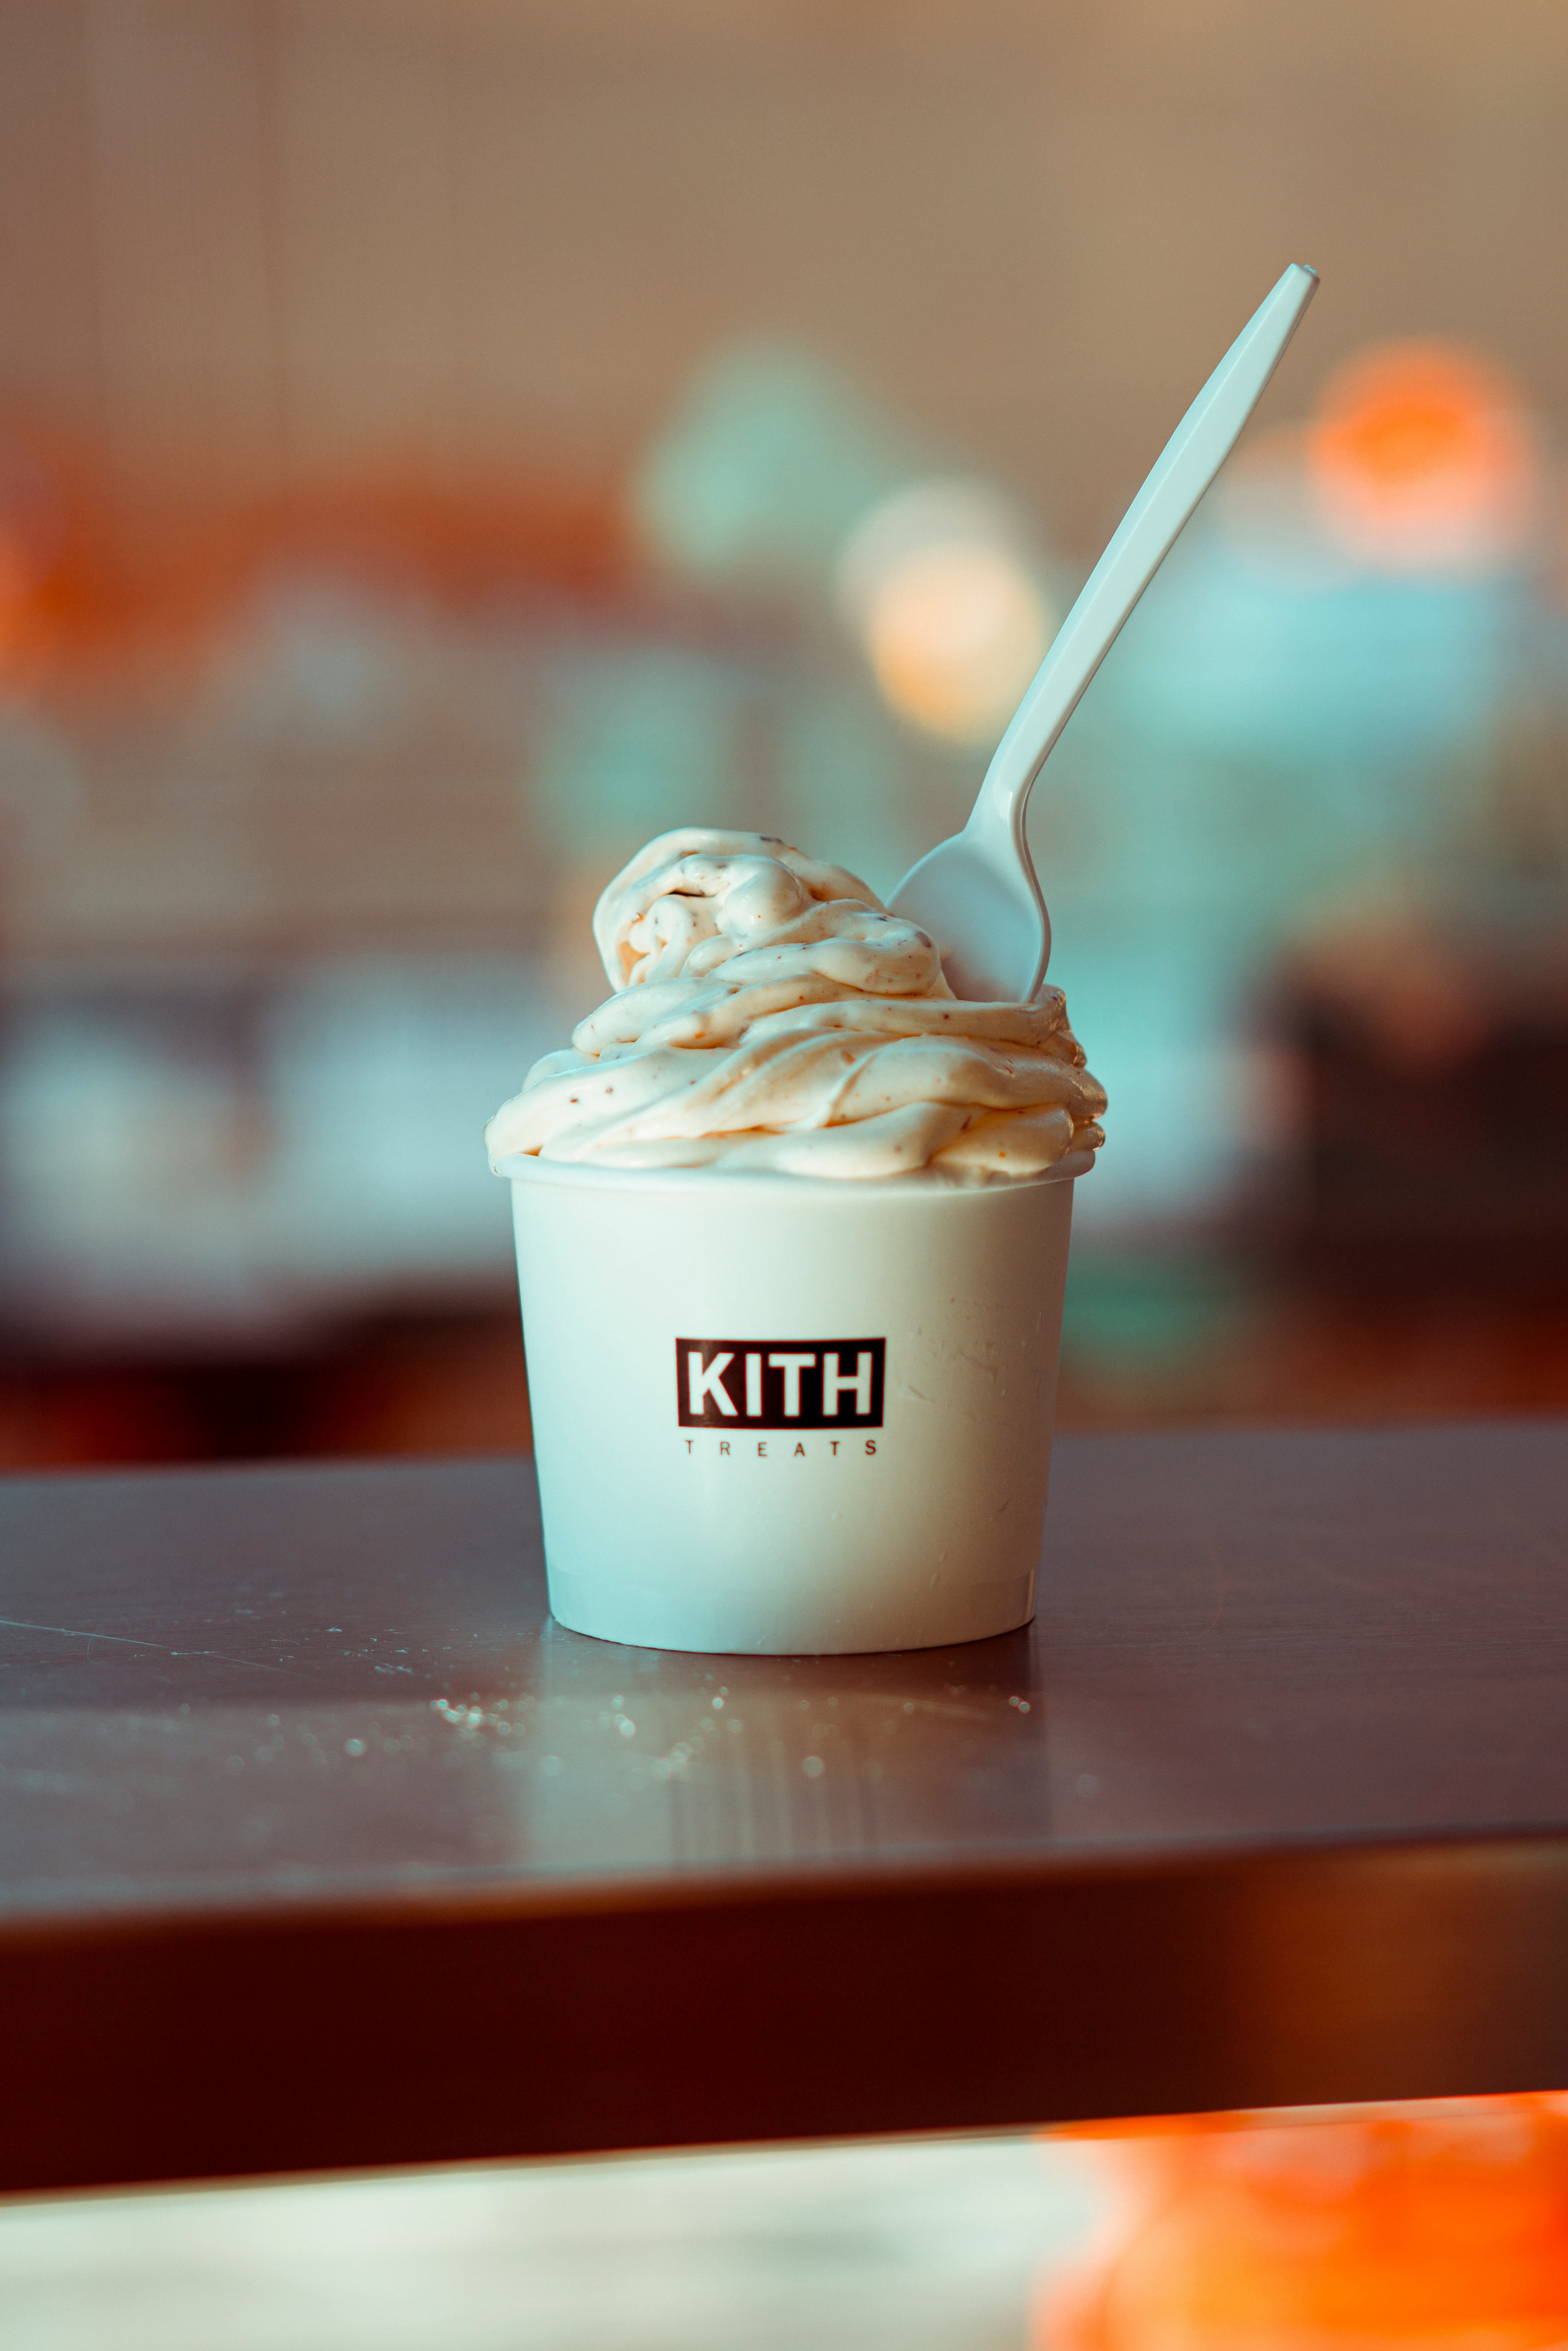 soft ice cream in Kith cup